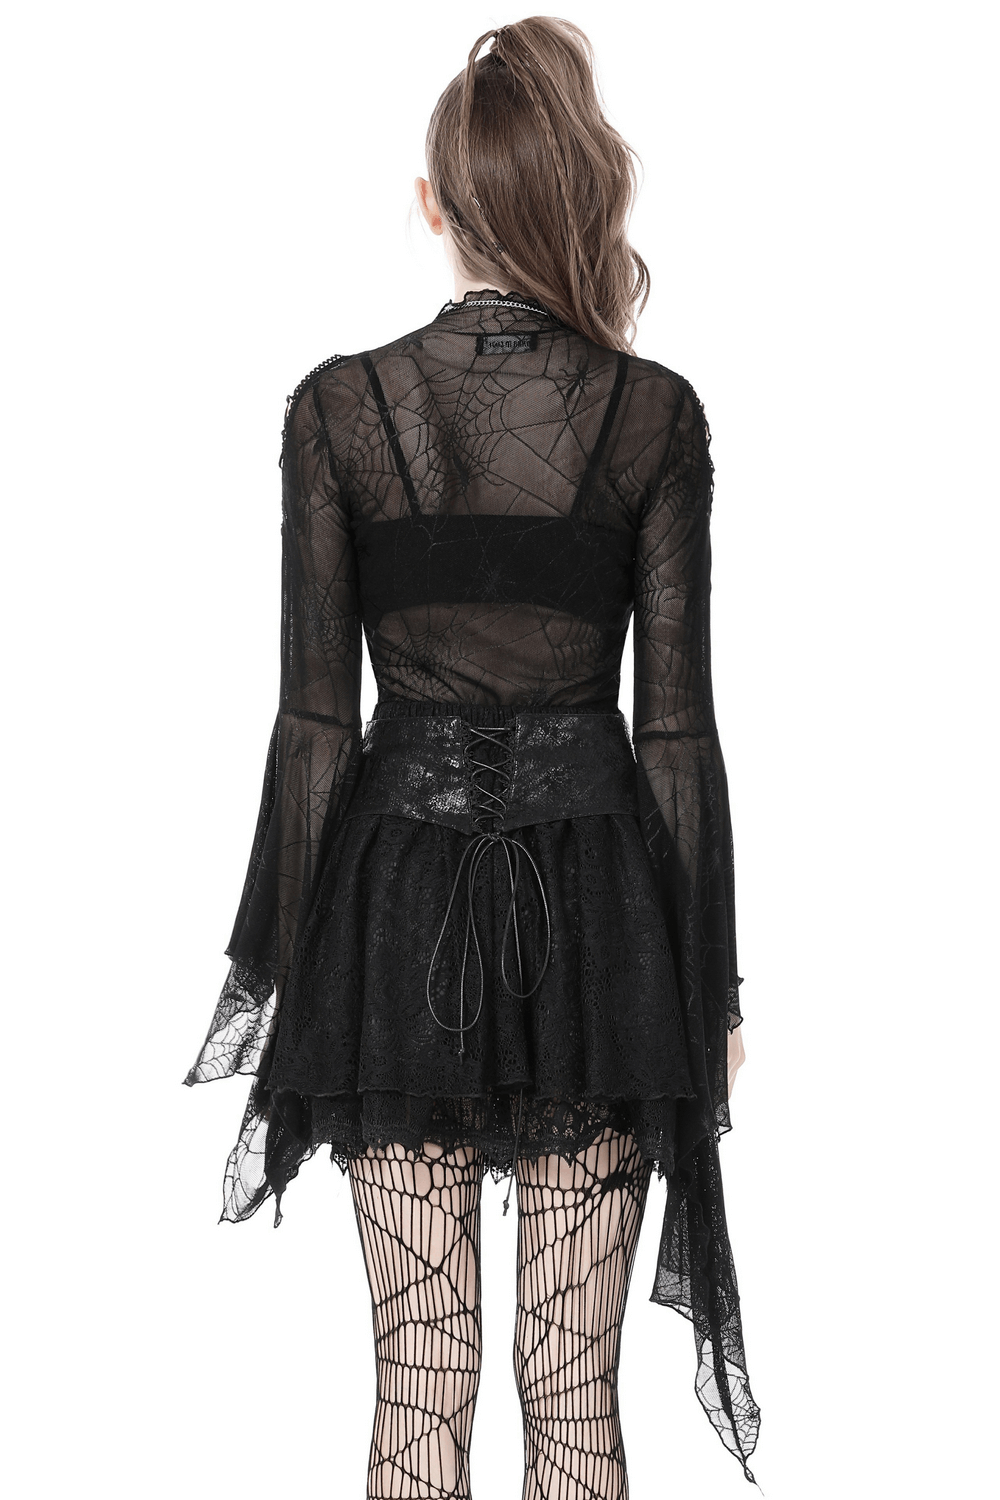 Gothic Women's Mesh Spiderweb Top with Long Sleeves